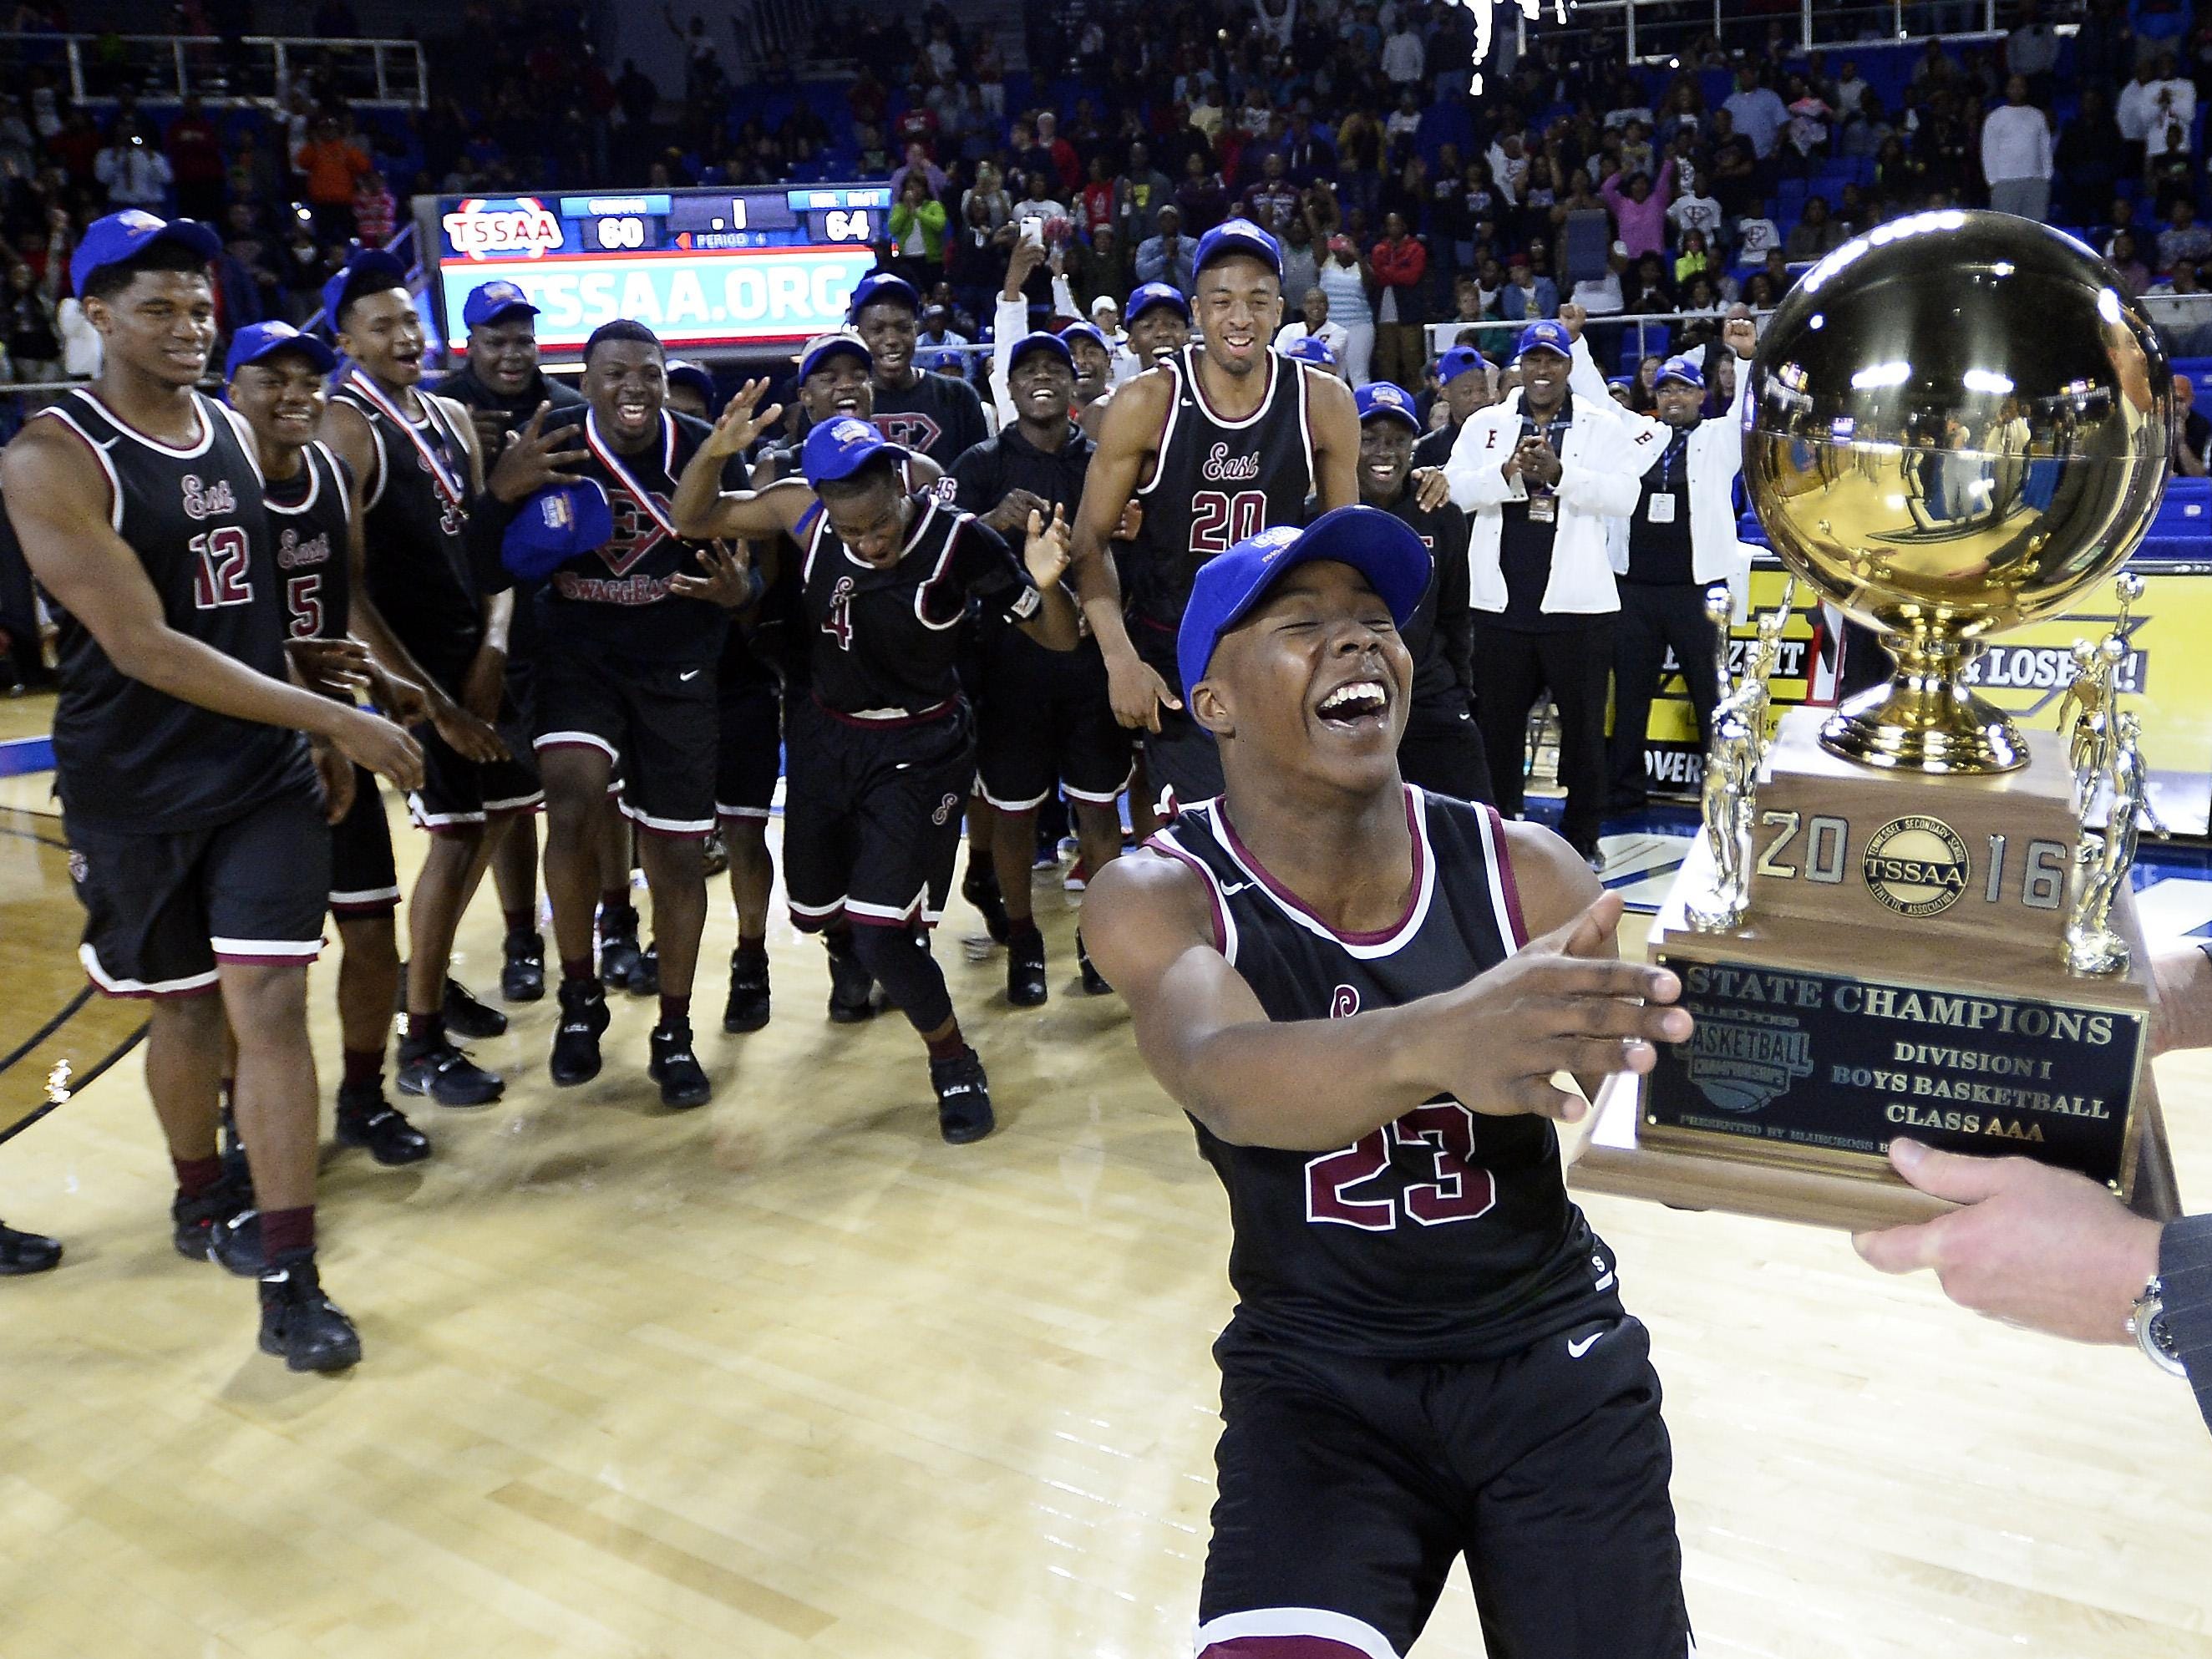 Memphis East’s Kobe Freeman (23) grabs the trophy as it is presented to the team after beating Cordova in the Class AAA championship on Saturday.